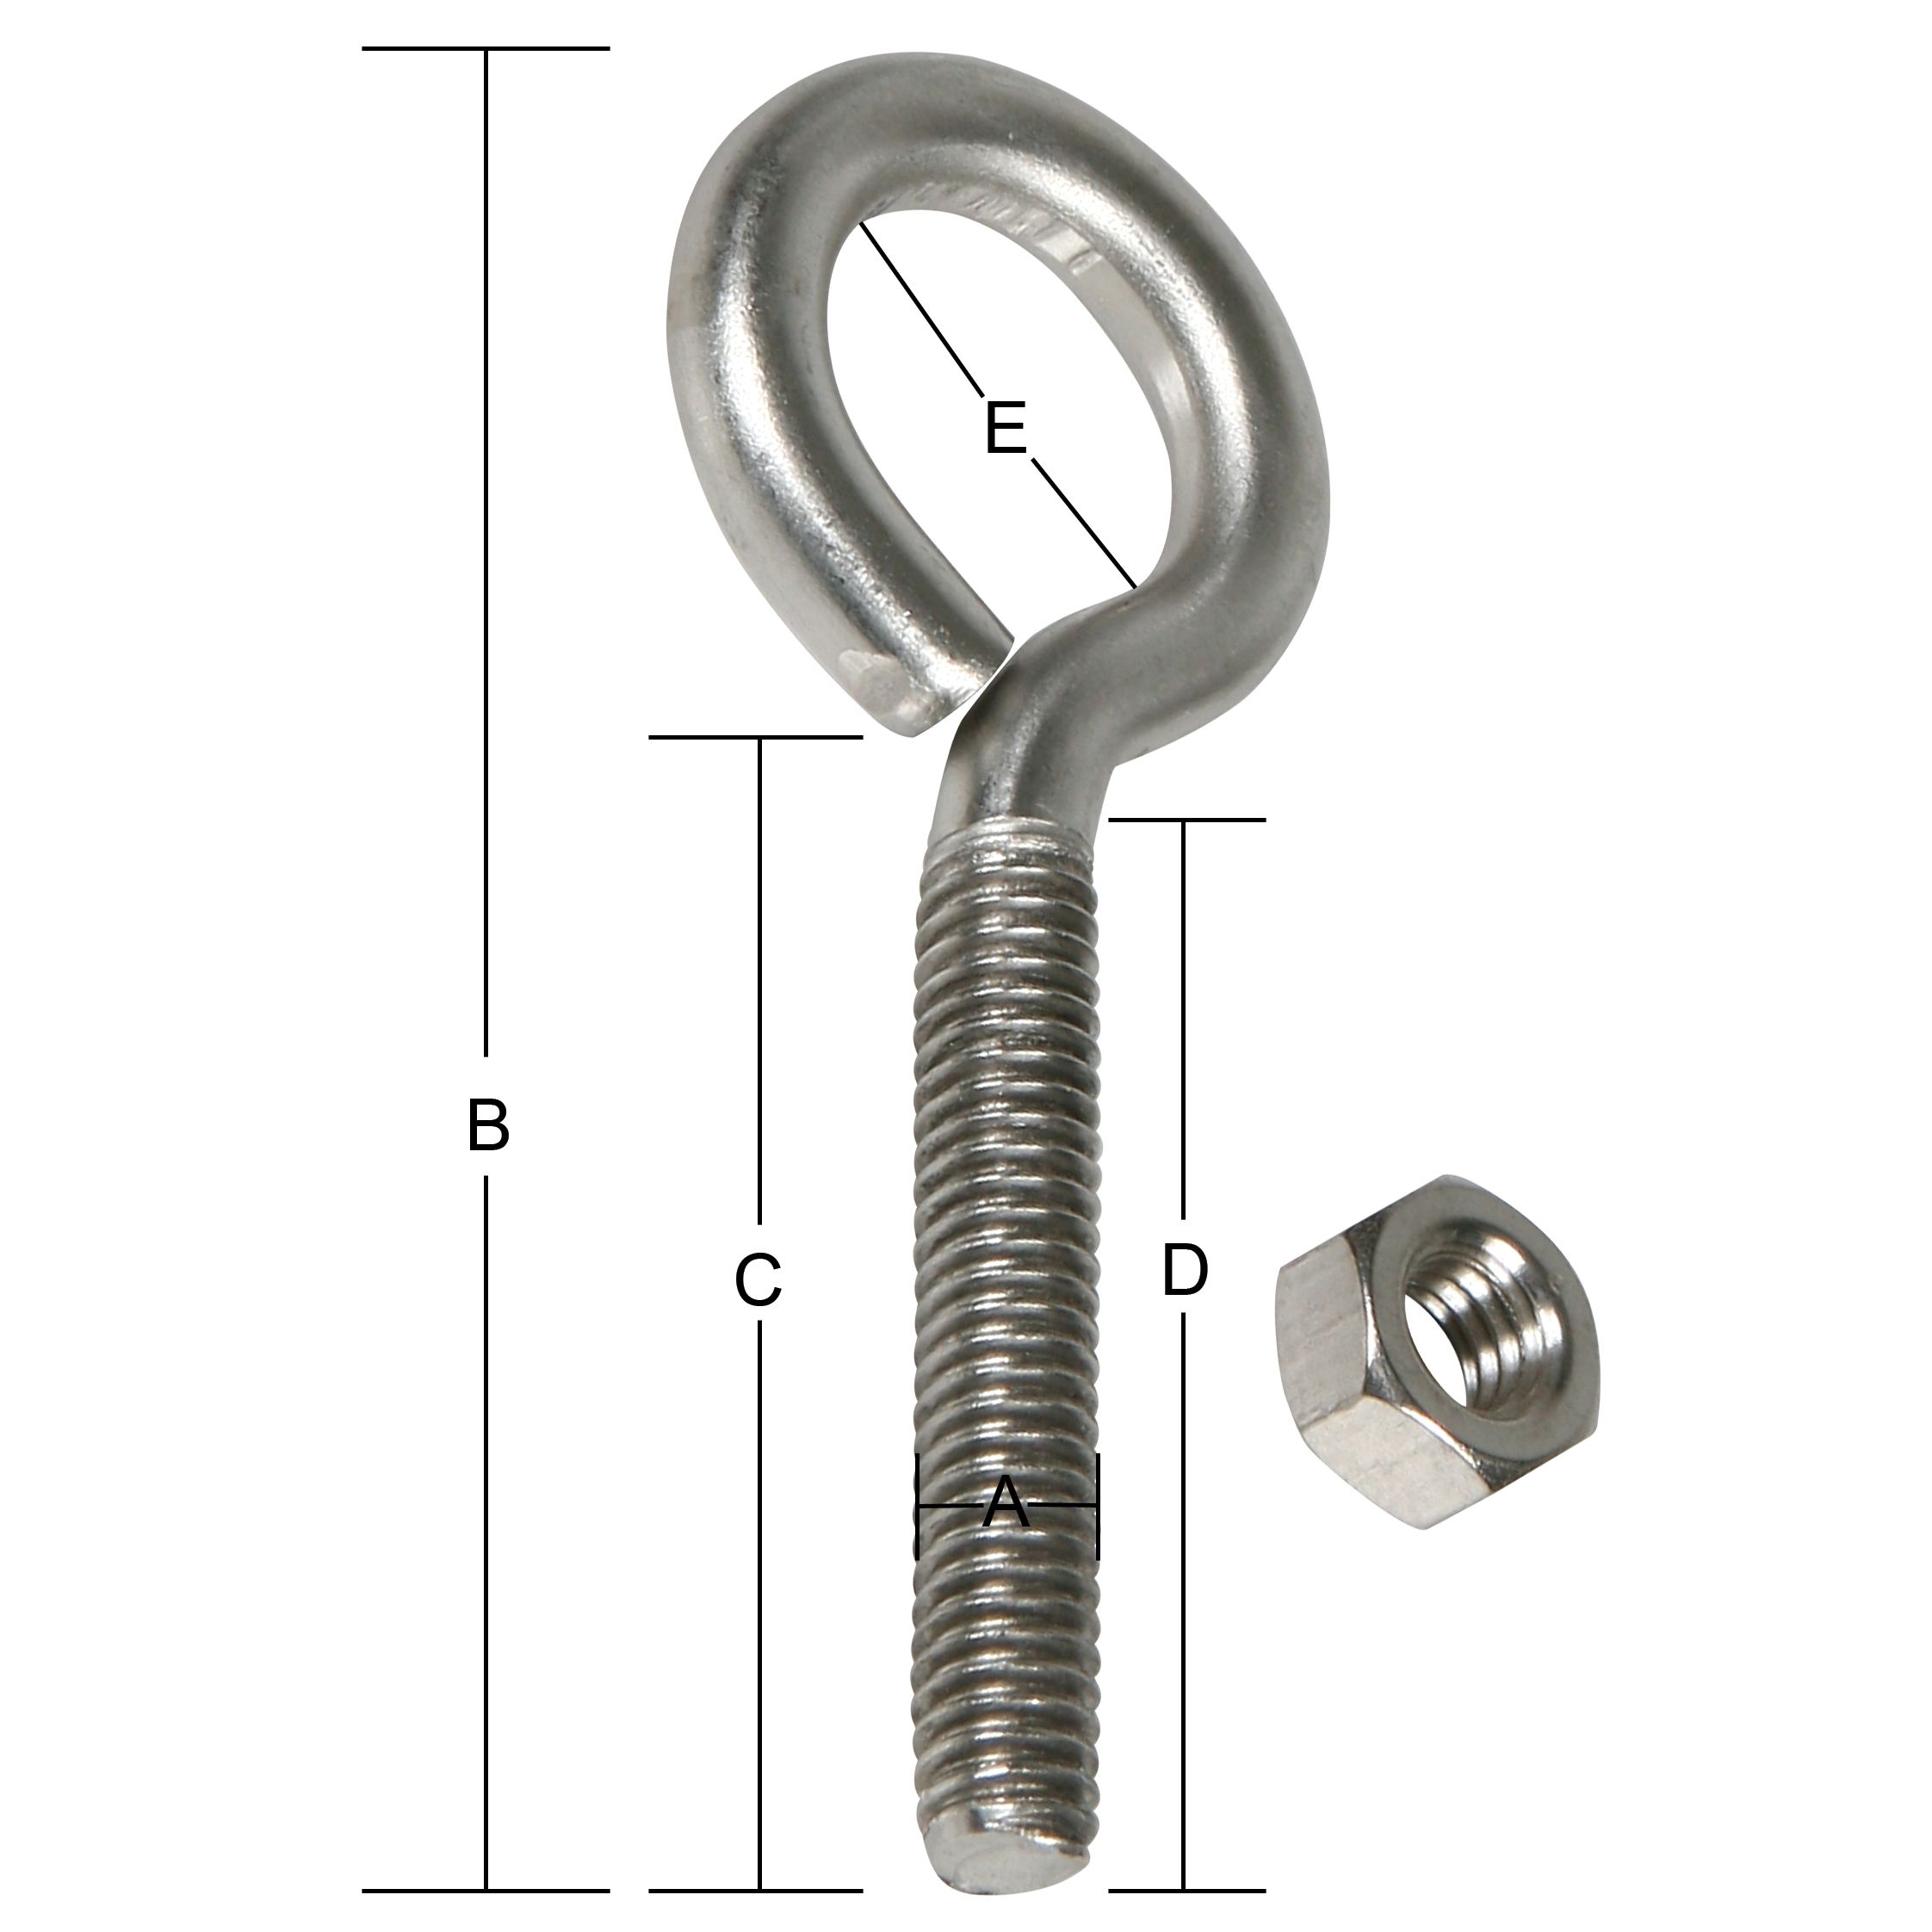 Packs Lehigh Stainless Steel Eye Bolt w Nut 3/16" x 3 7/8,Total 8 Eyebolts Details about   4 